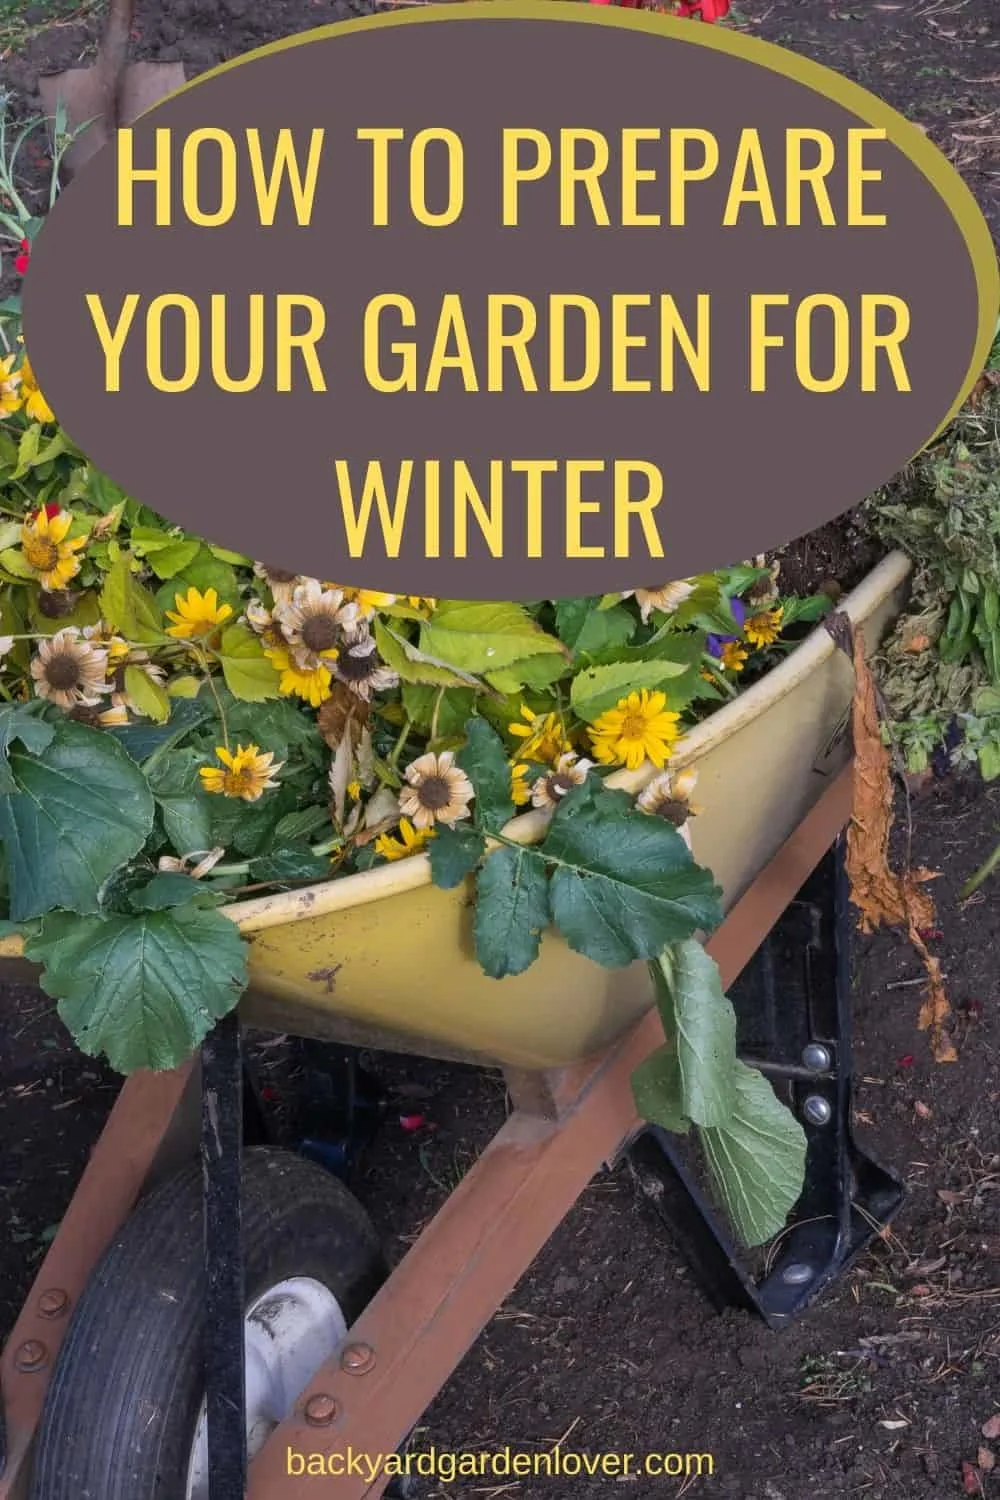 How to prepare your garden for winter - Pinteress image